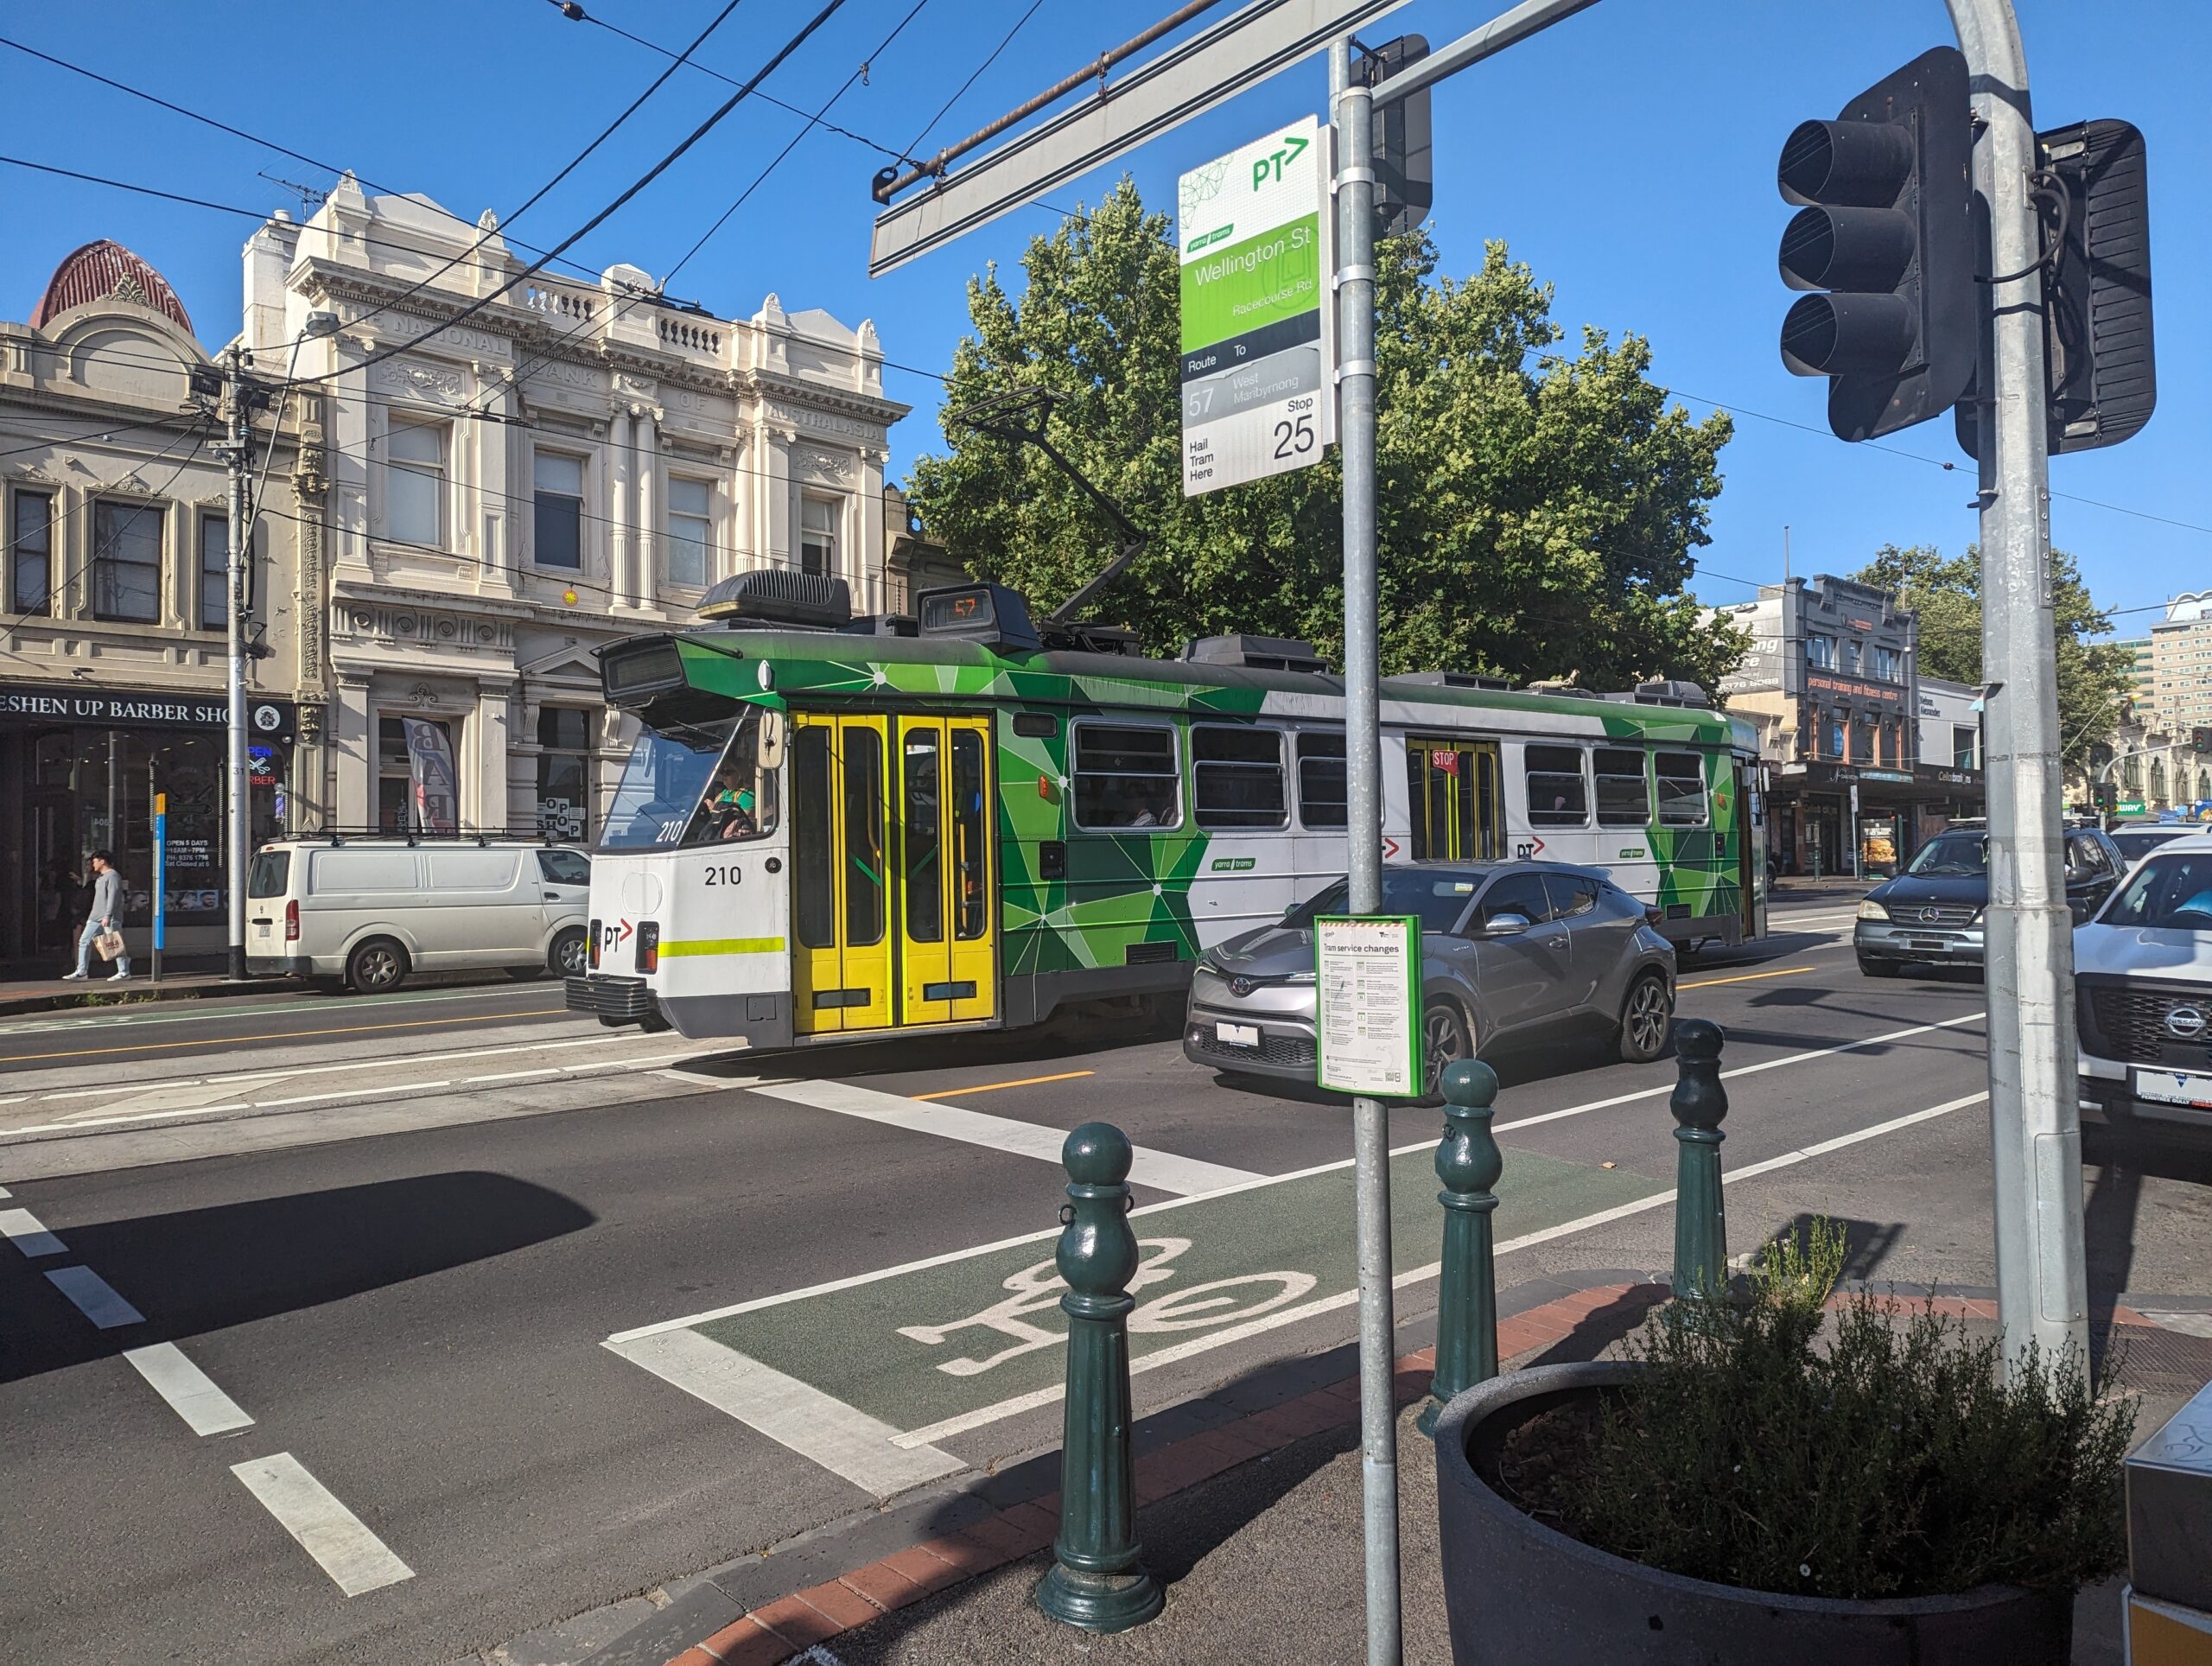 A high-floor tram sits in the middle of a street, among cars. A pole with a sign denotes the tram stop; there is no platform or other infrastructure.